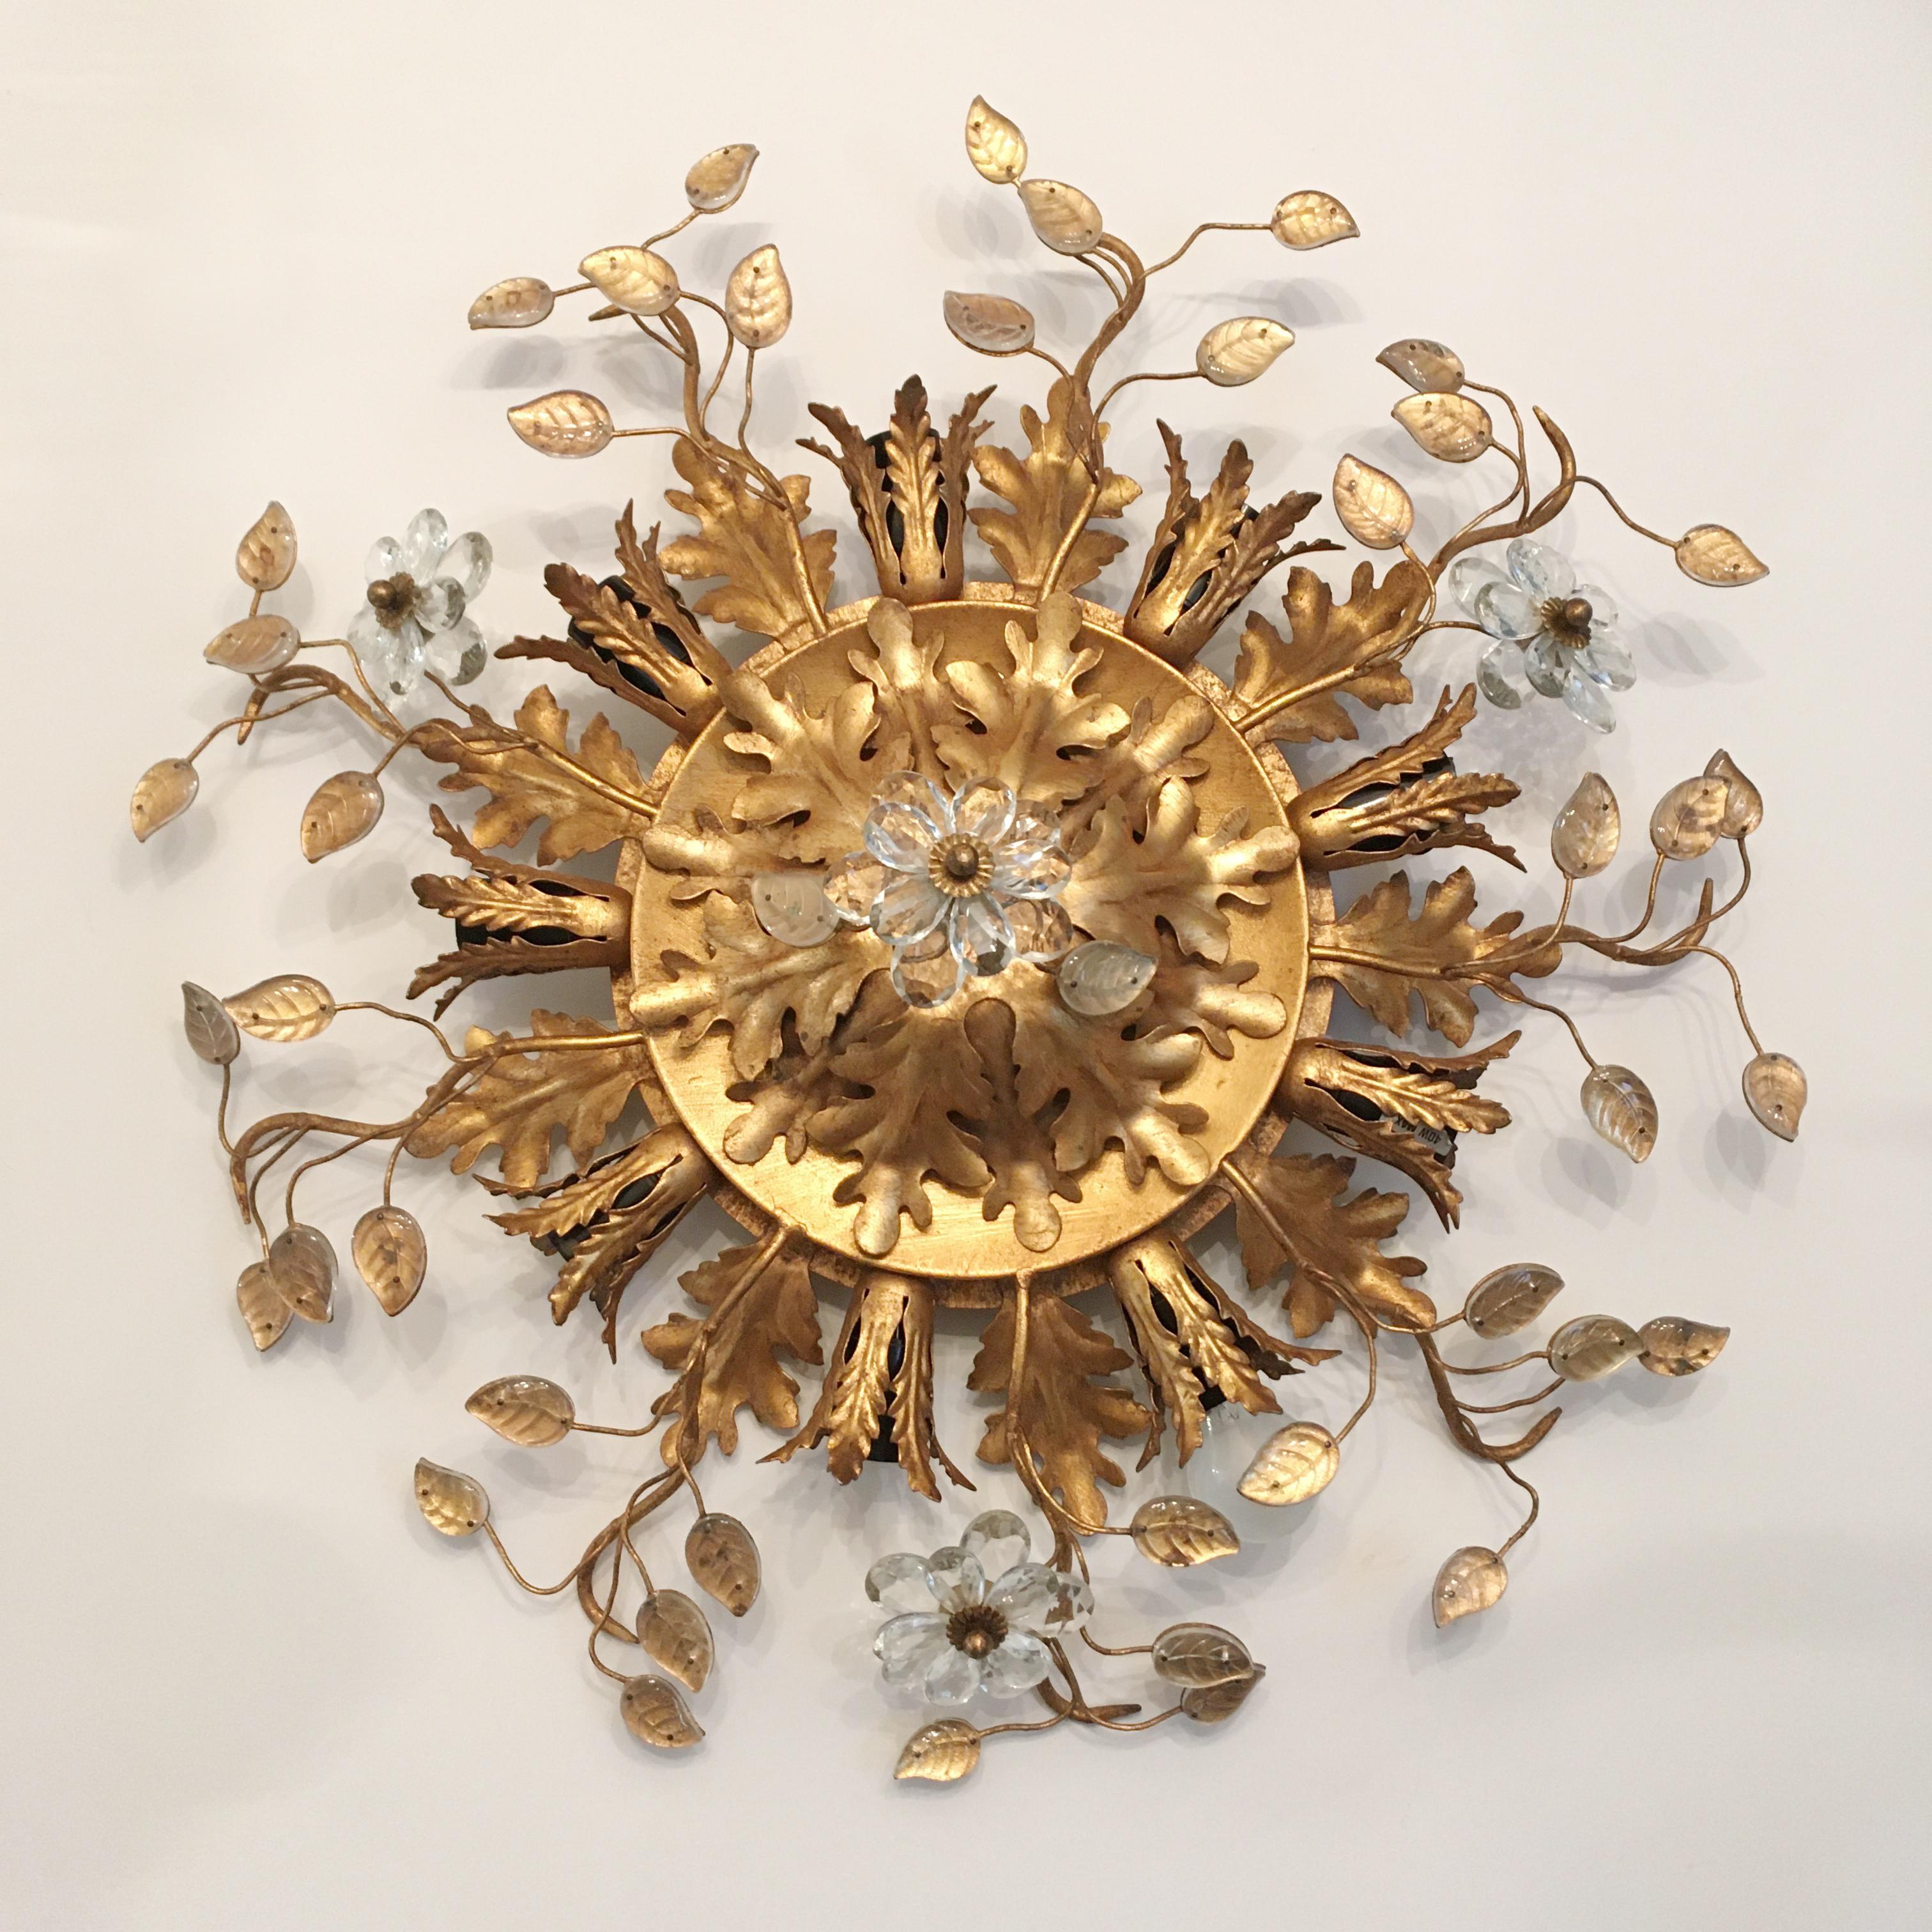 Hand-Crafted Banci Firenze Florentine Ceiling Light with Murano Flowers